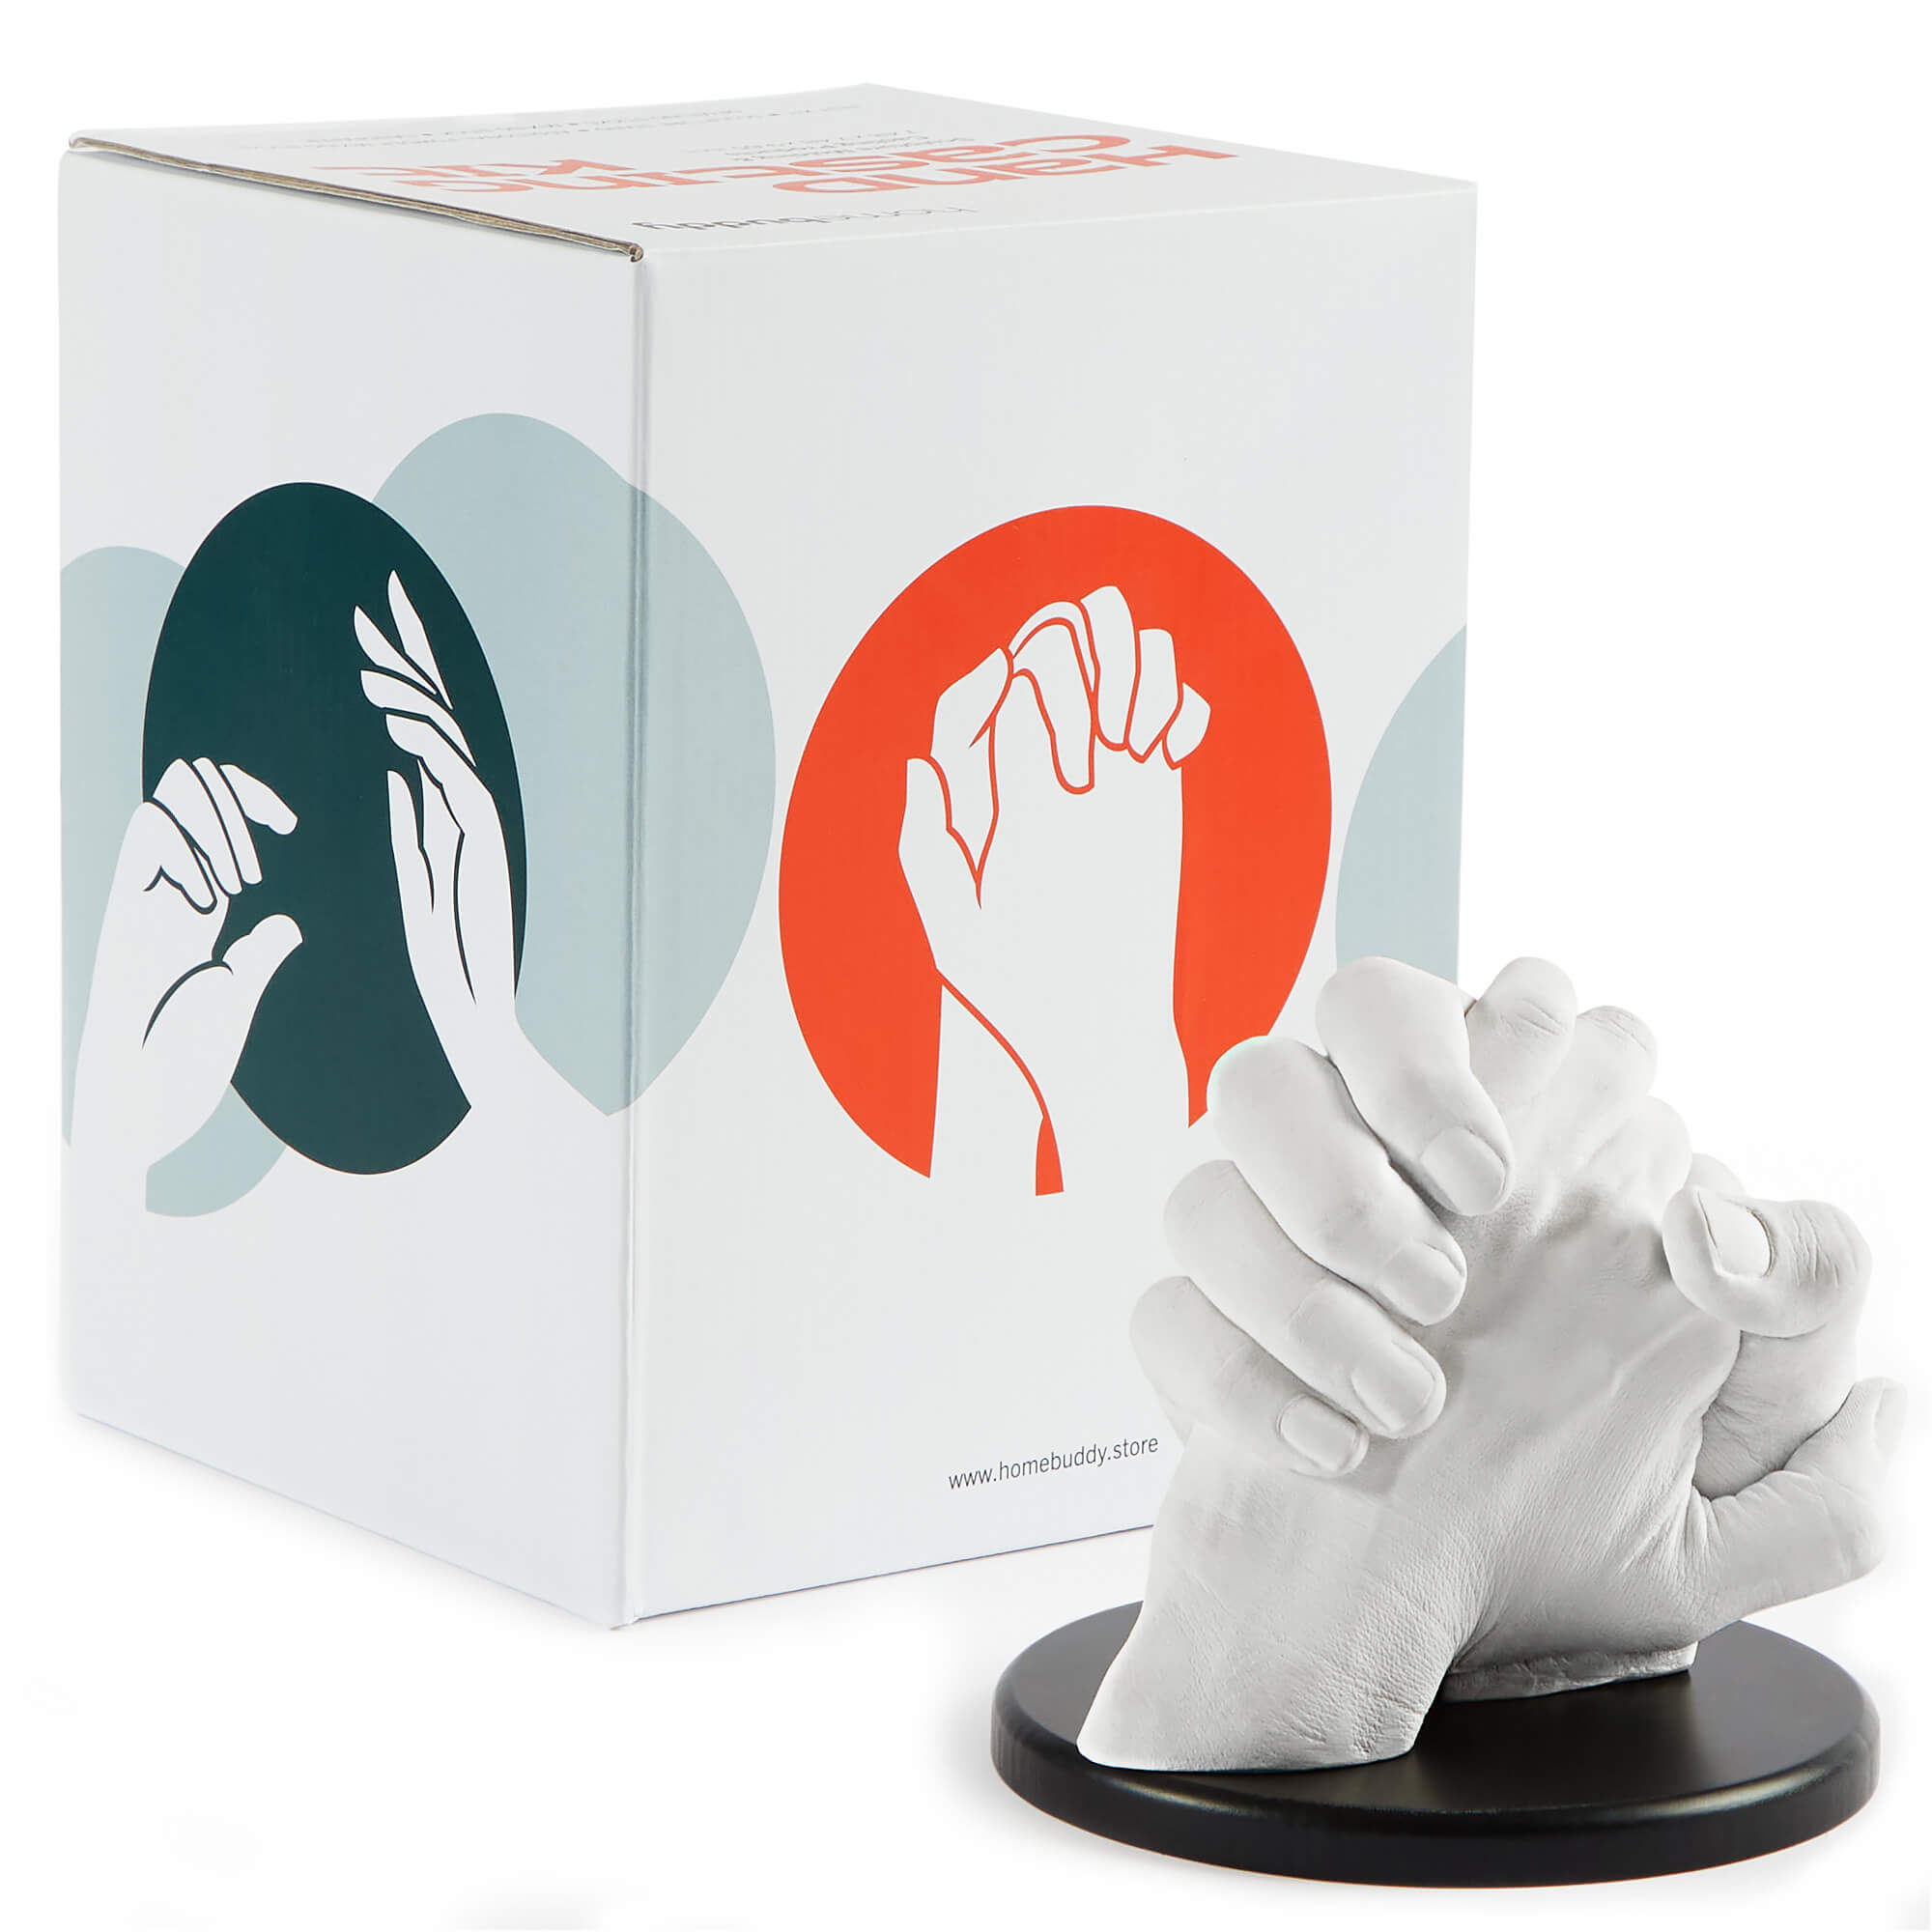 Holding Hands Couples 3D Casting Kit (ideal for 2/3 hands